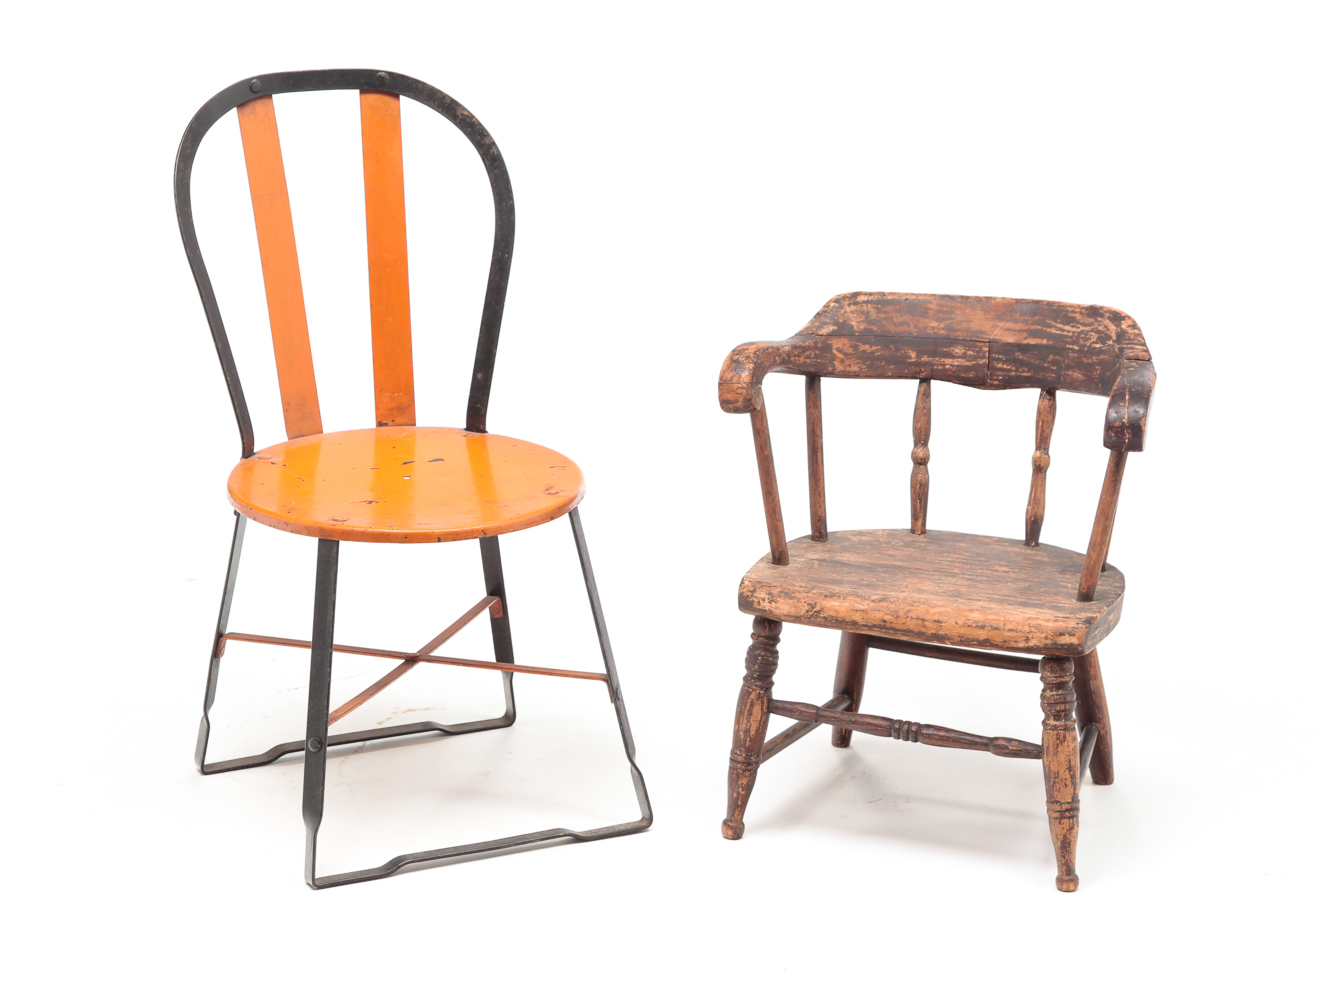 TWO AMERICAN CHILDREN'S CHAIRS.